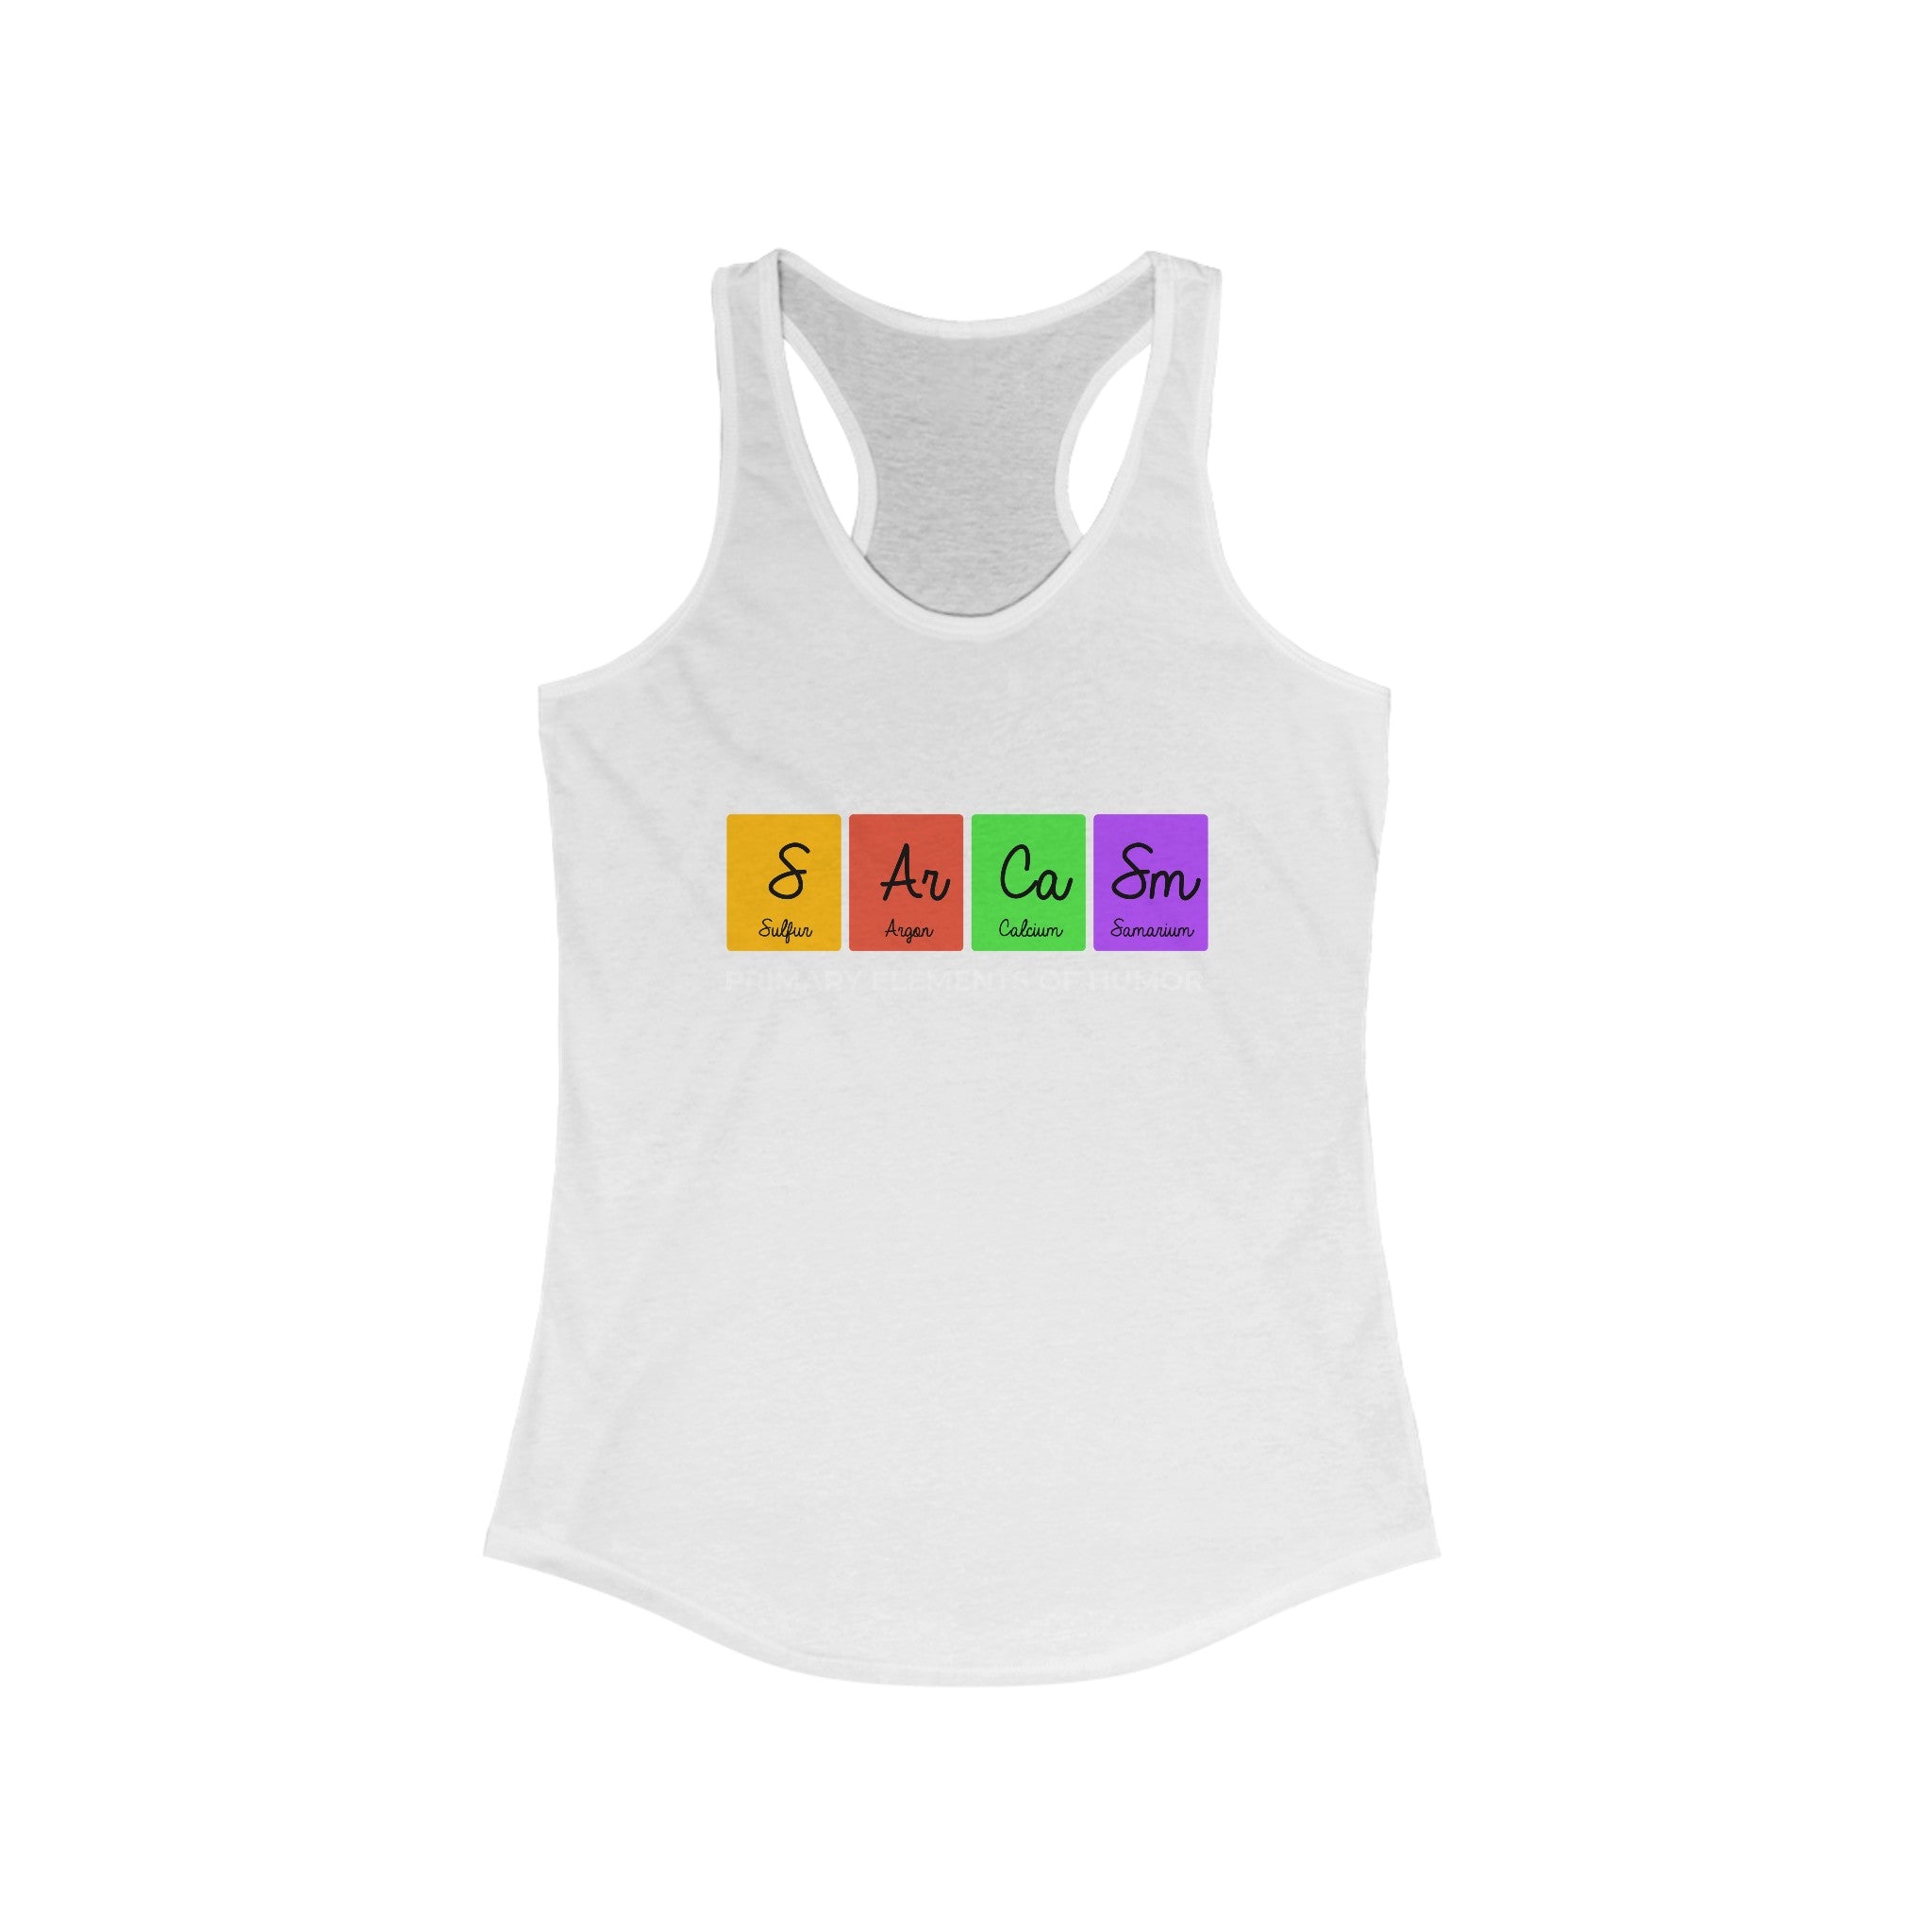 S-Ar-Ca-Sm - Women's Racerback Tank: This lightweight white racerback tank top features the text "Sarcasm" written using colorful periodic table element symbols: S, Ar, Ca, Sm—perfect for an active life.